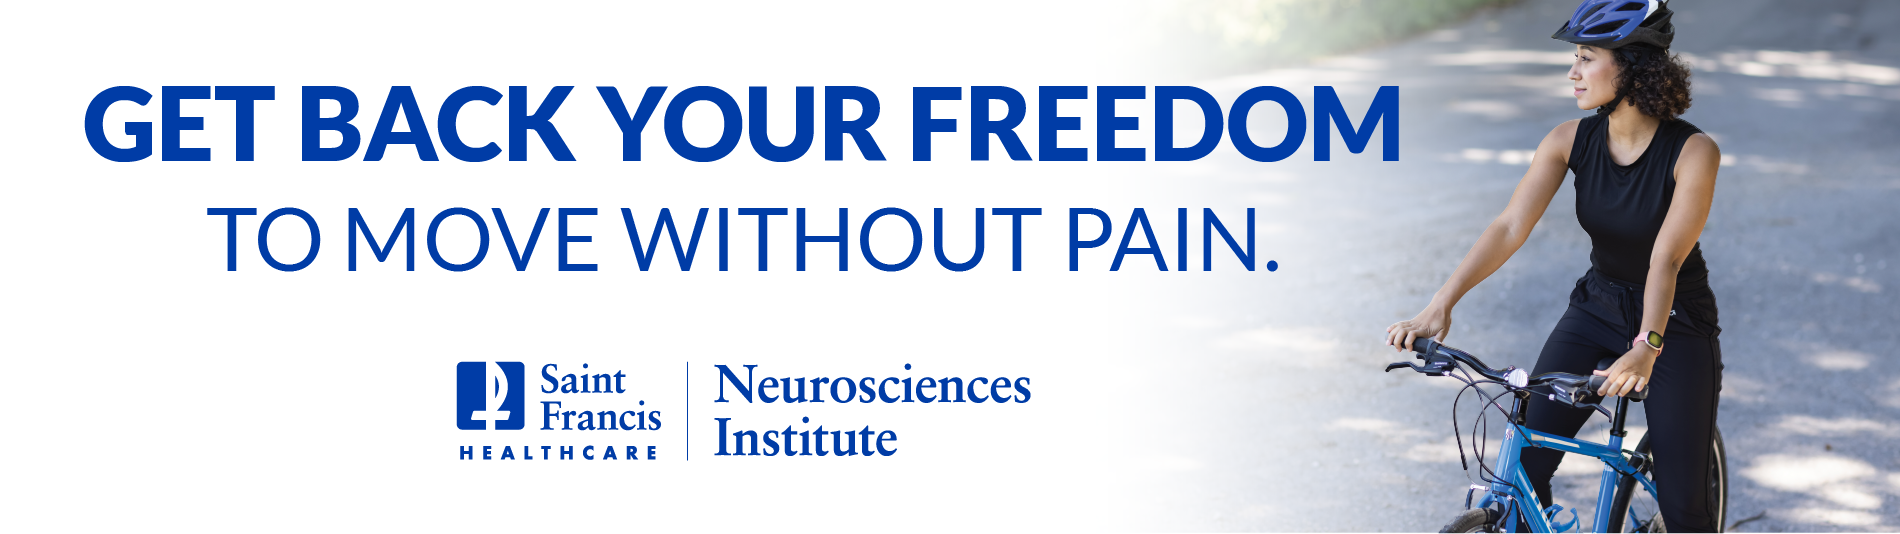 Neurosciences Institute - Get Back Your Freedom to Move Without Pain